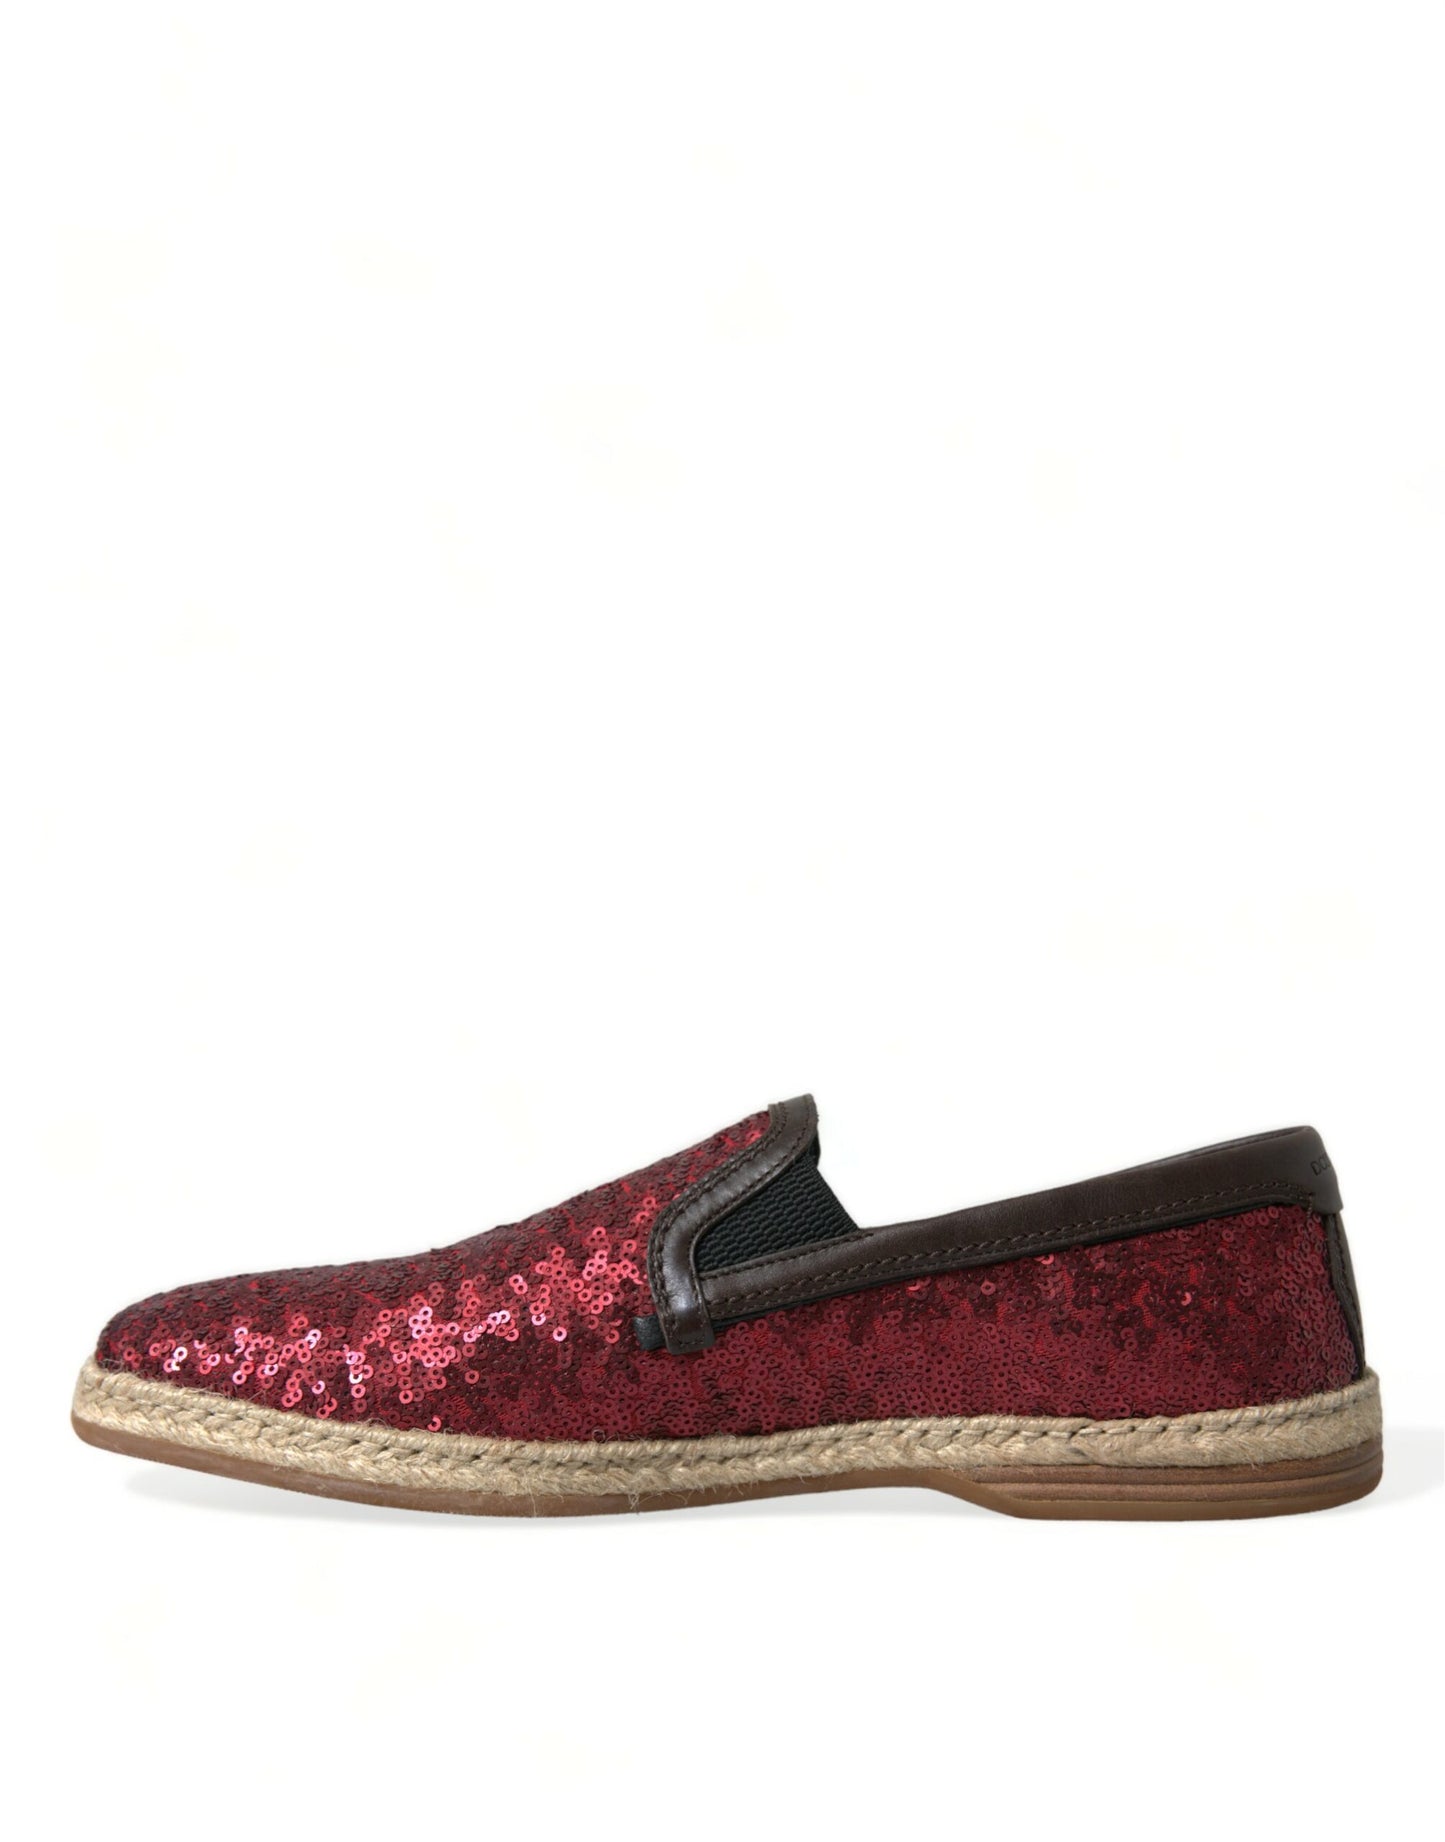 Dolce & Gabbana Red Sequined Leather Loafers